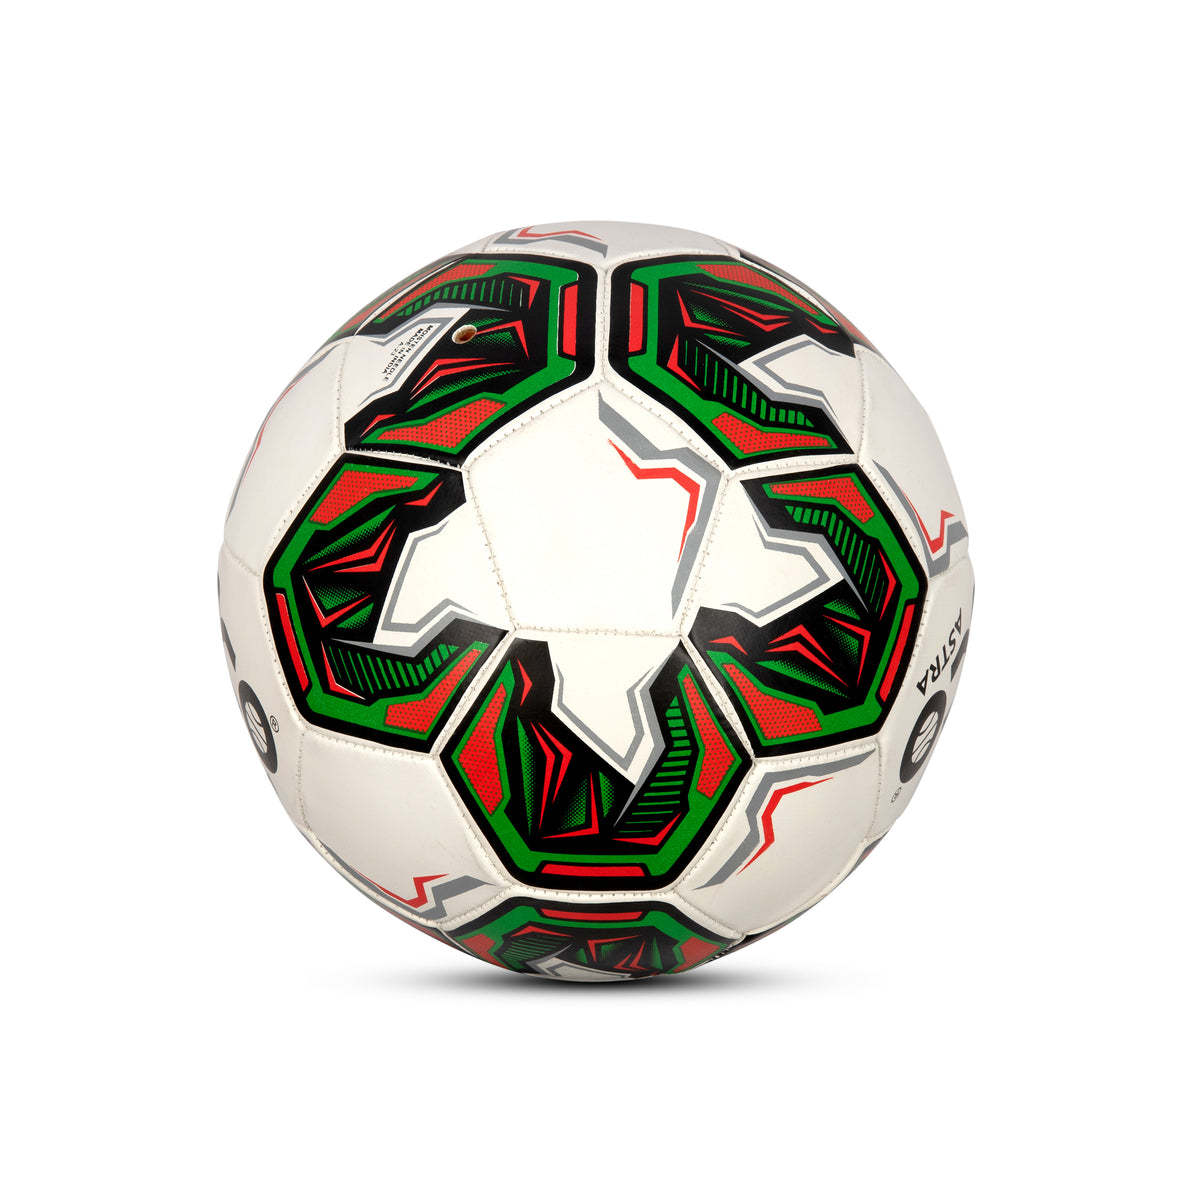 Soccer Astra Ball at best price in Jalandhar by Ceela